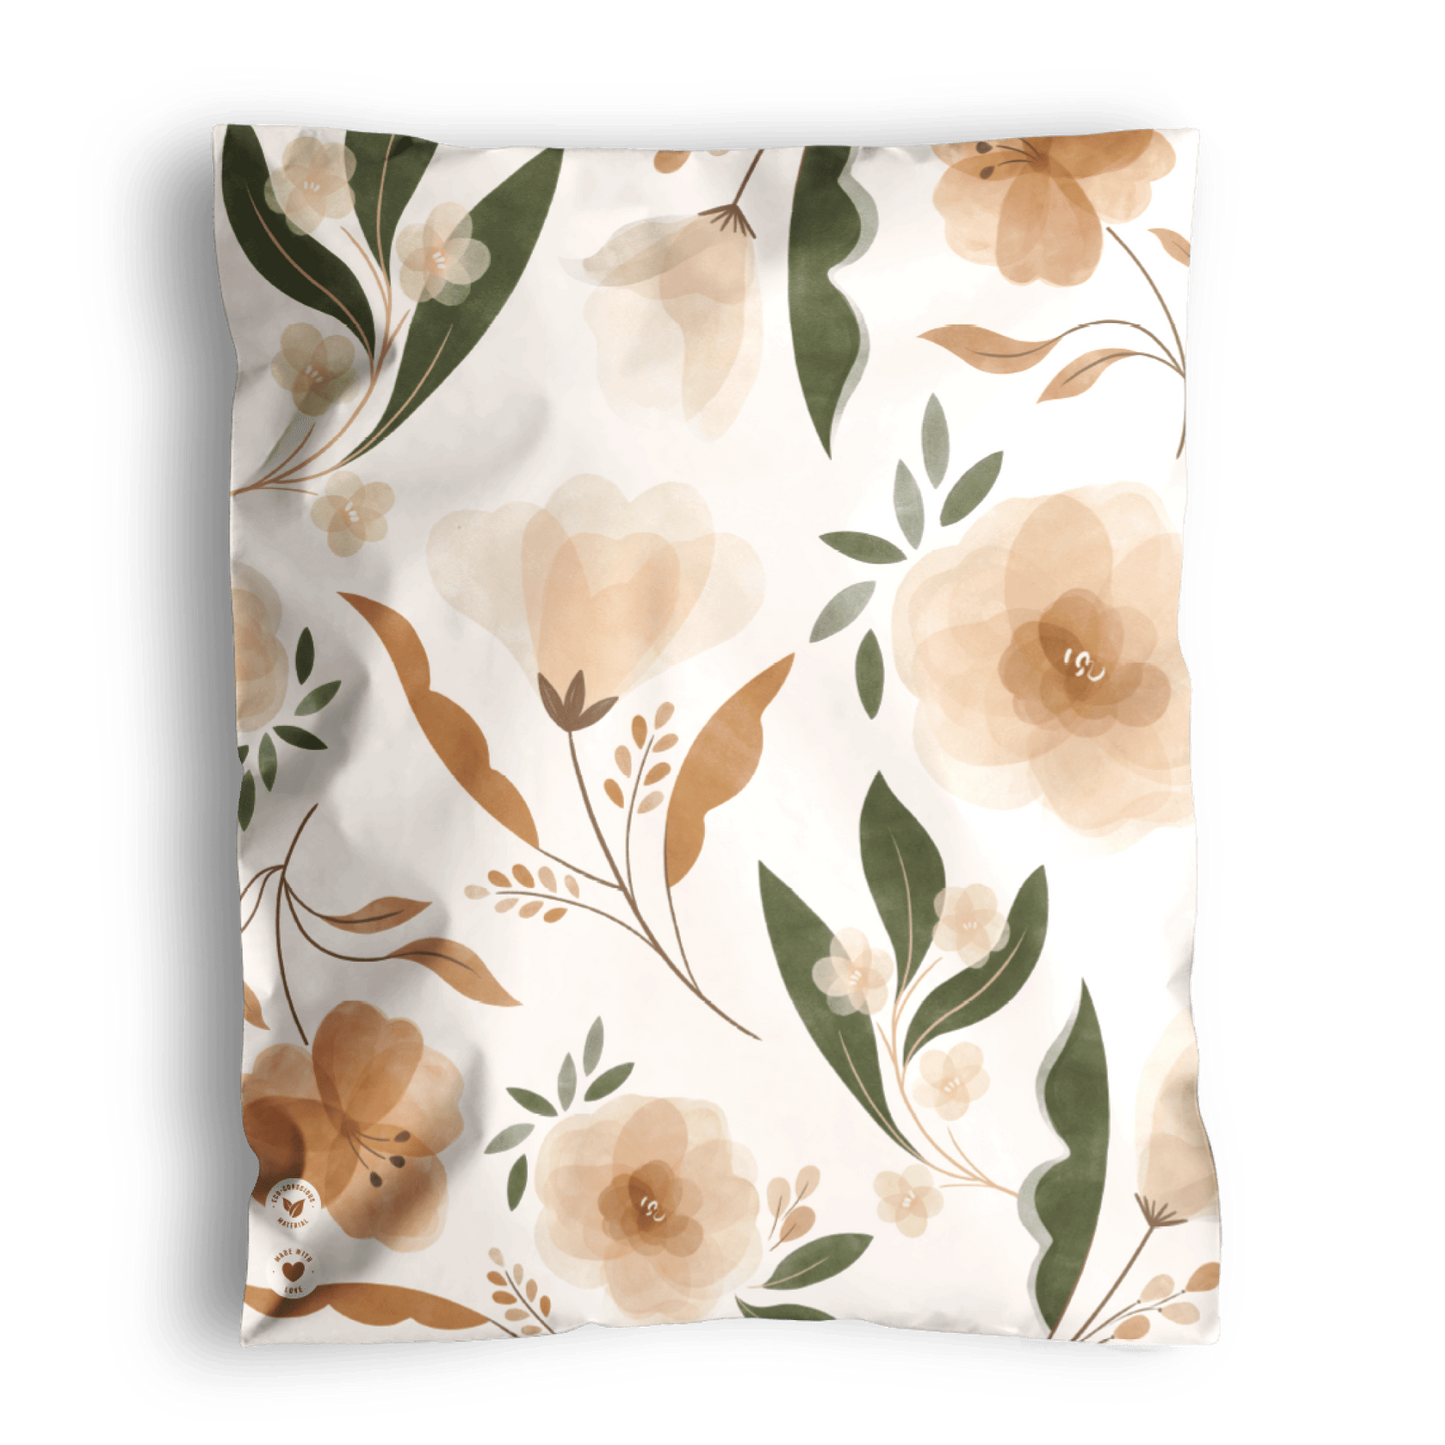 A Camelia Bloom Biodegradable Mailers 10" x 13" blanket with a folded corner displaying a watermark, shipped in recyclable mailer bags from impack.co.